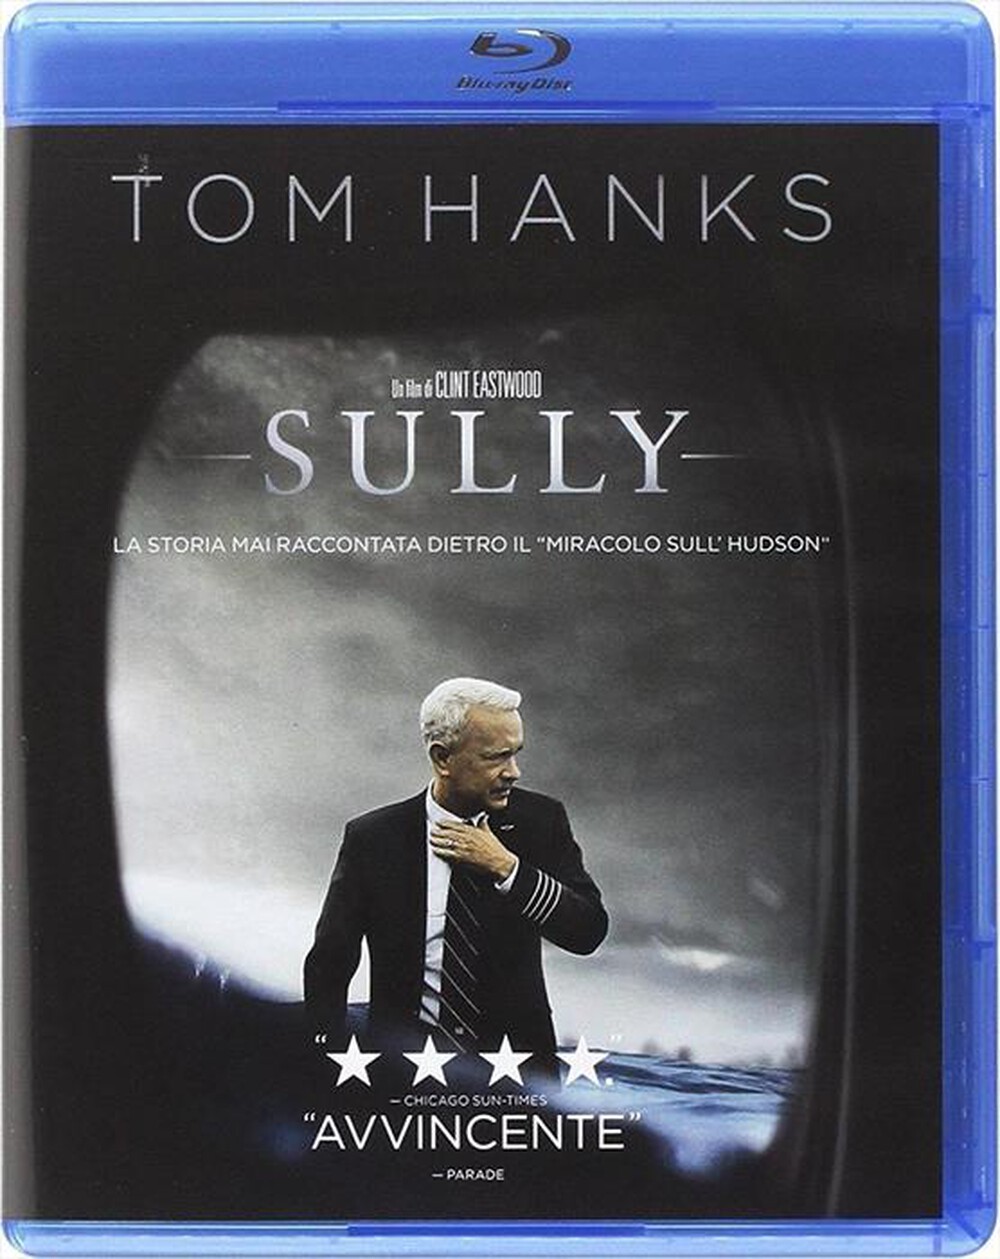 "WARNER HOME VIDEO - Sully"